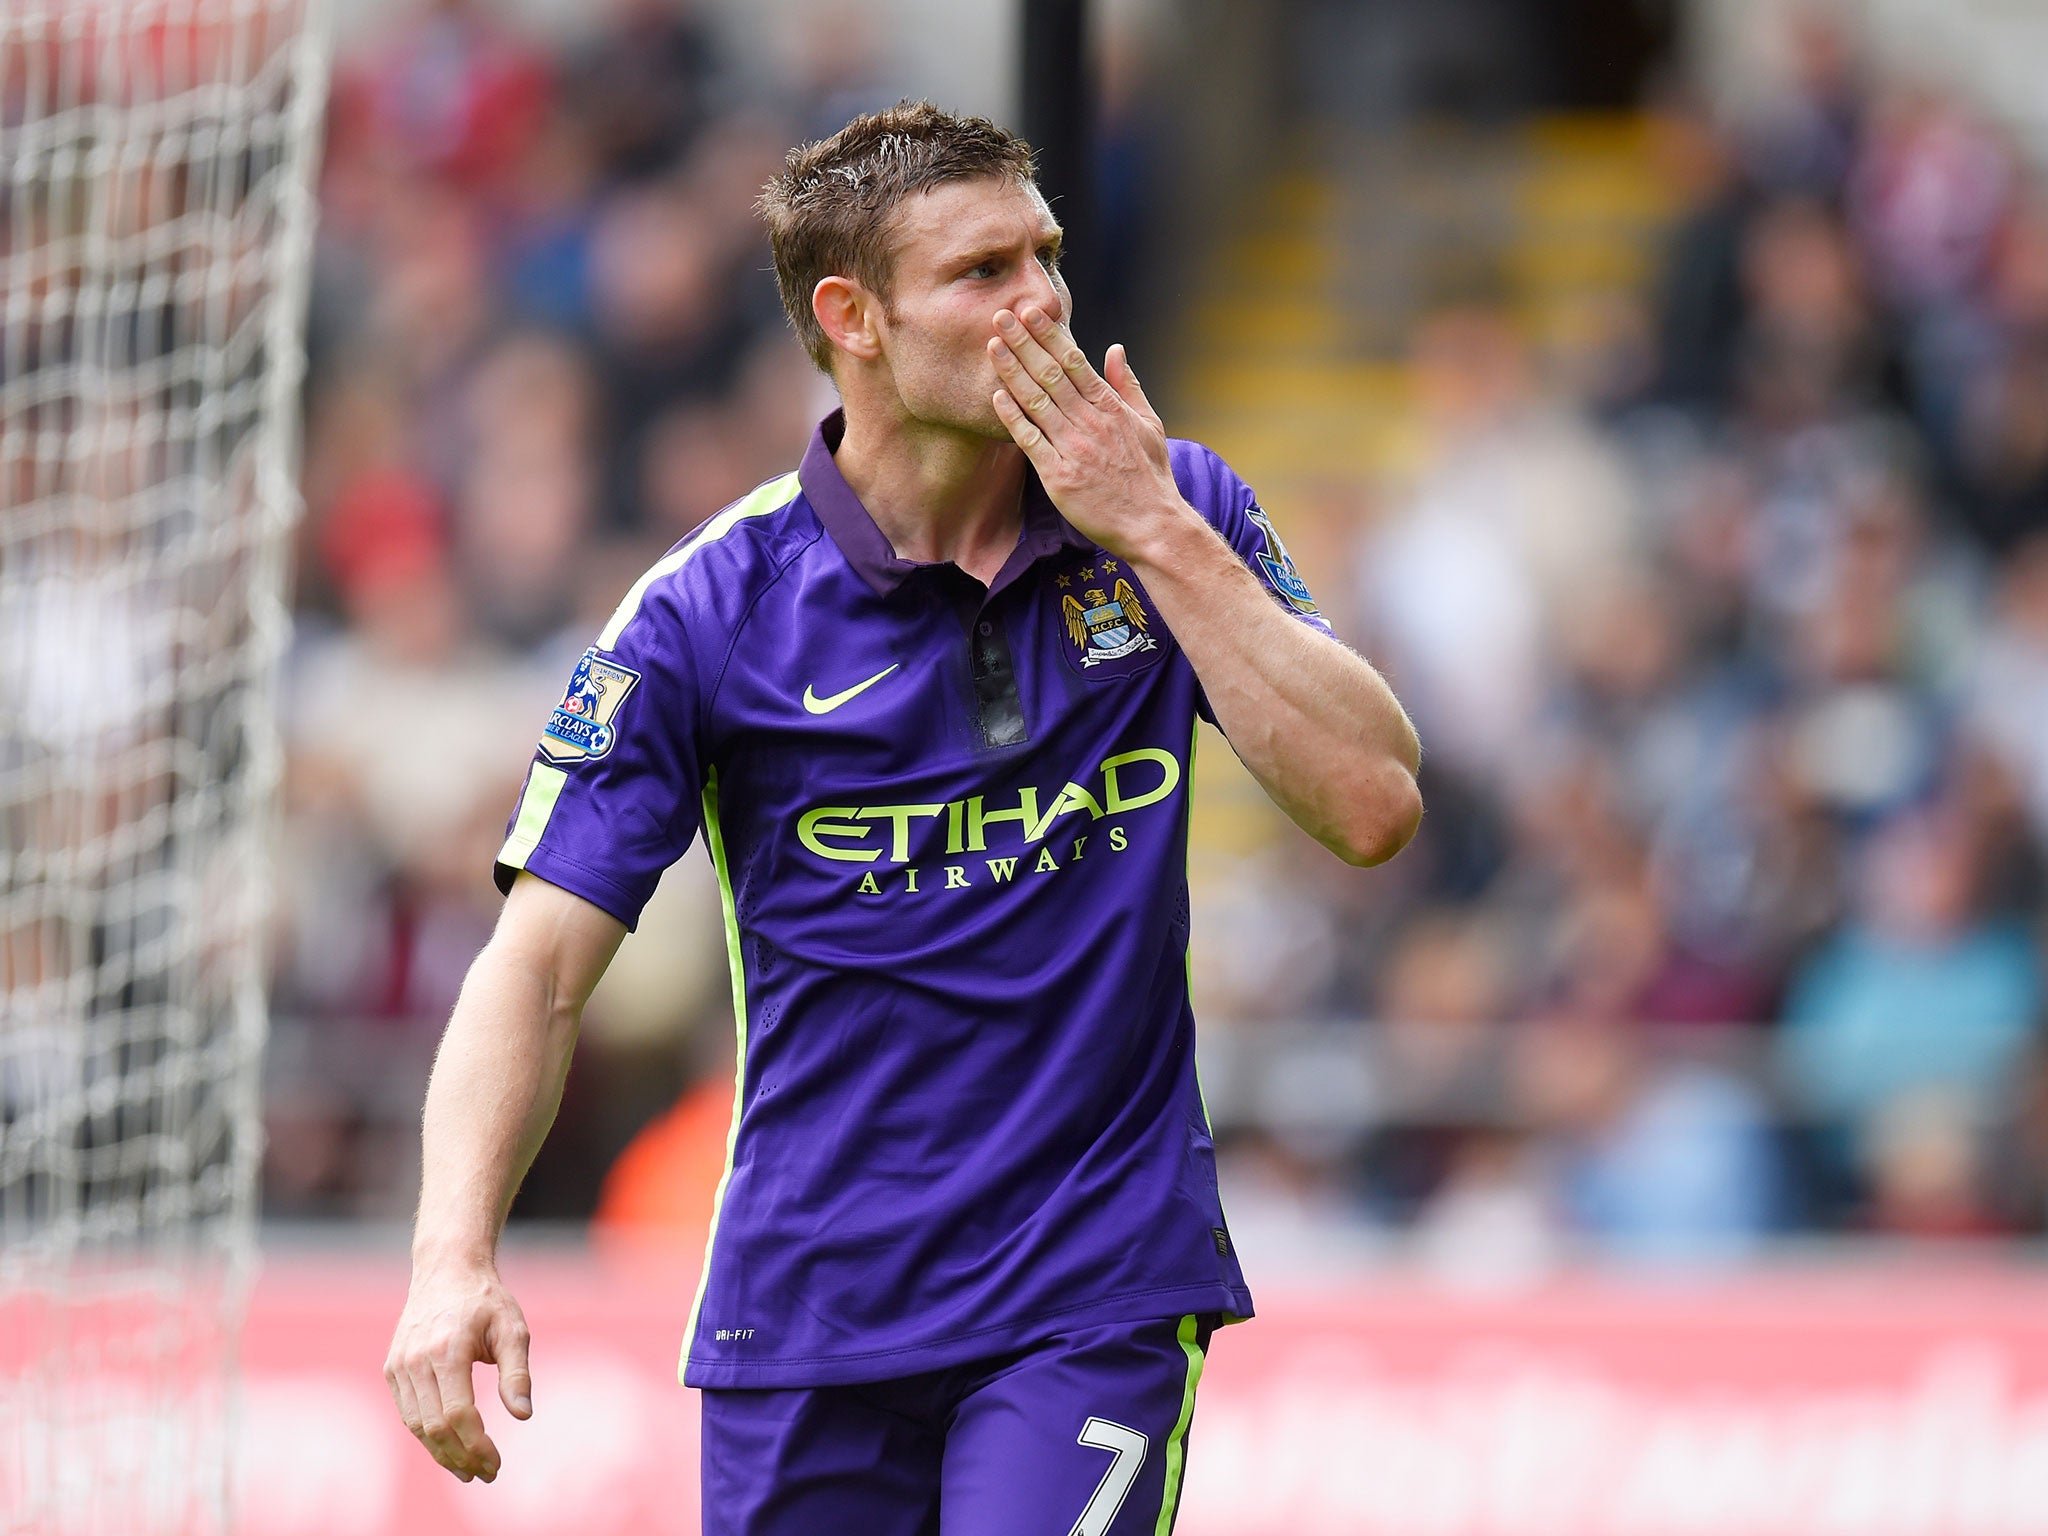 James Milner during his time at Manchester City